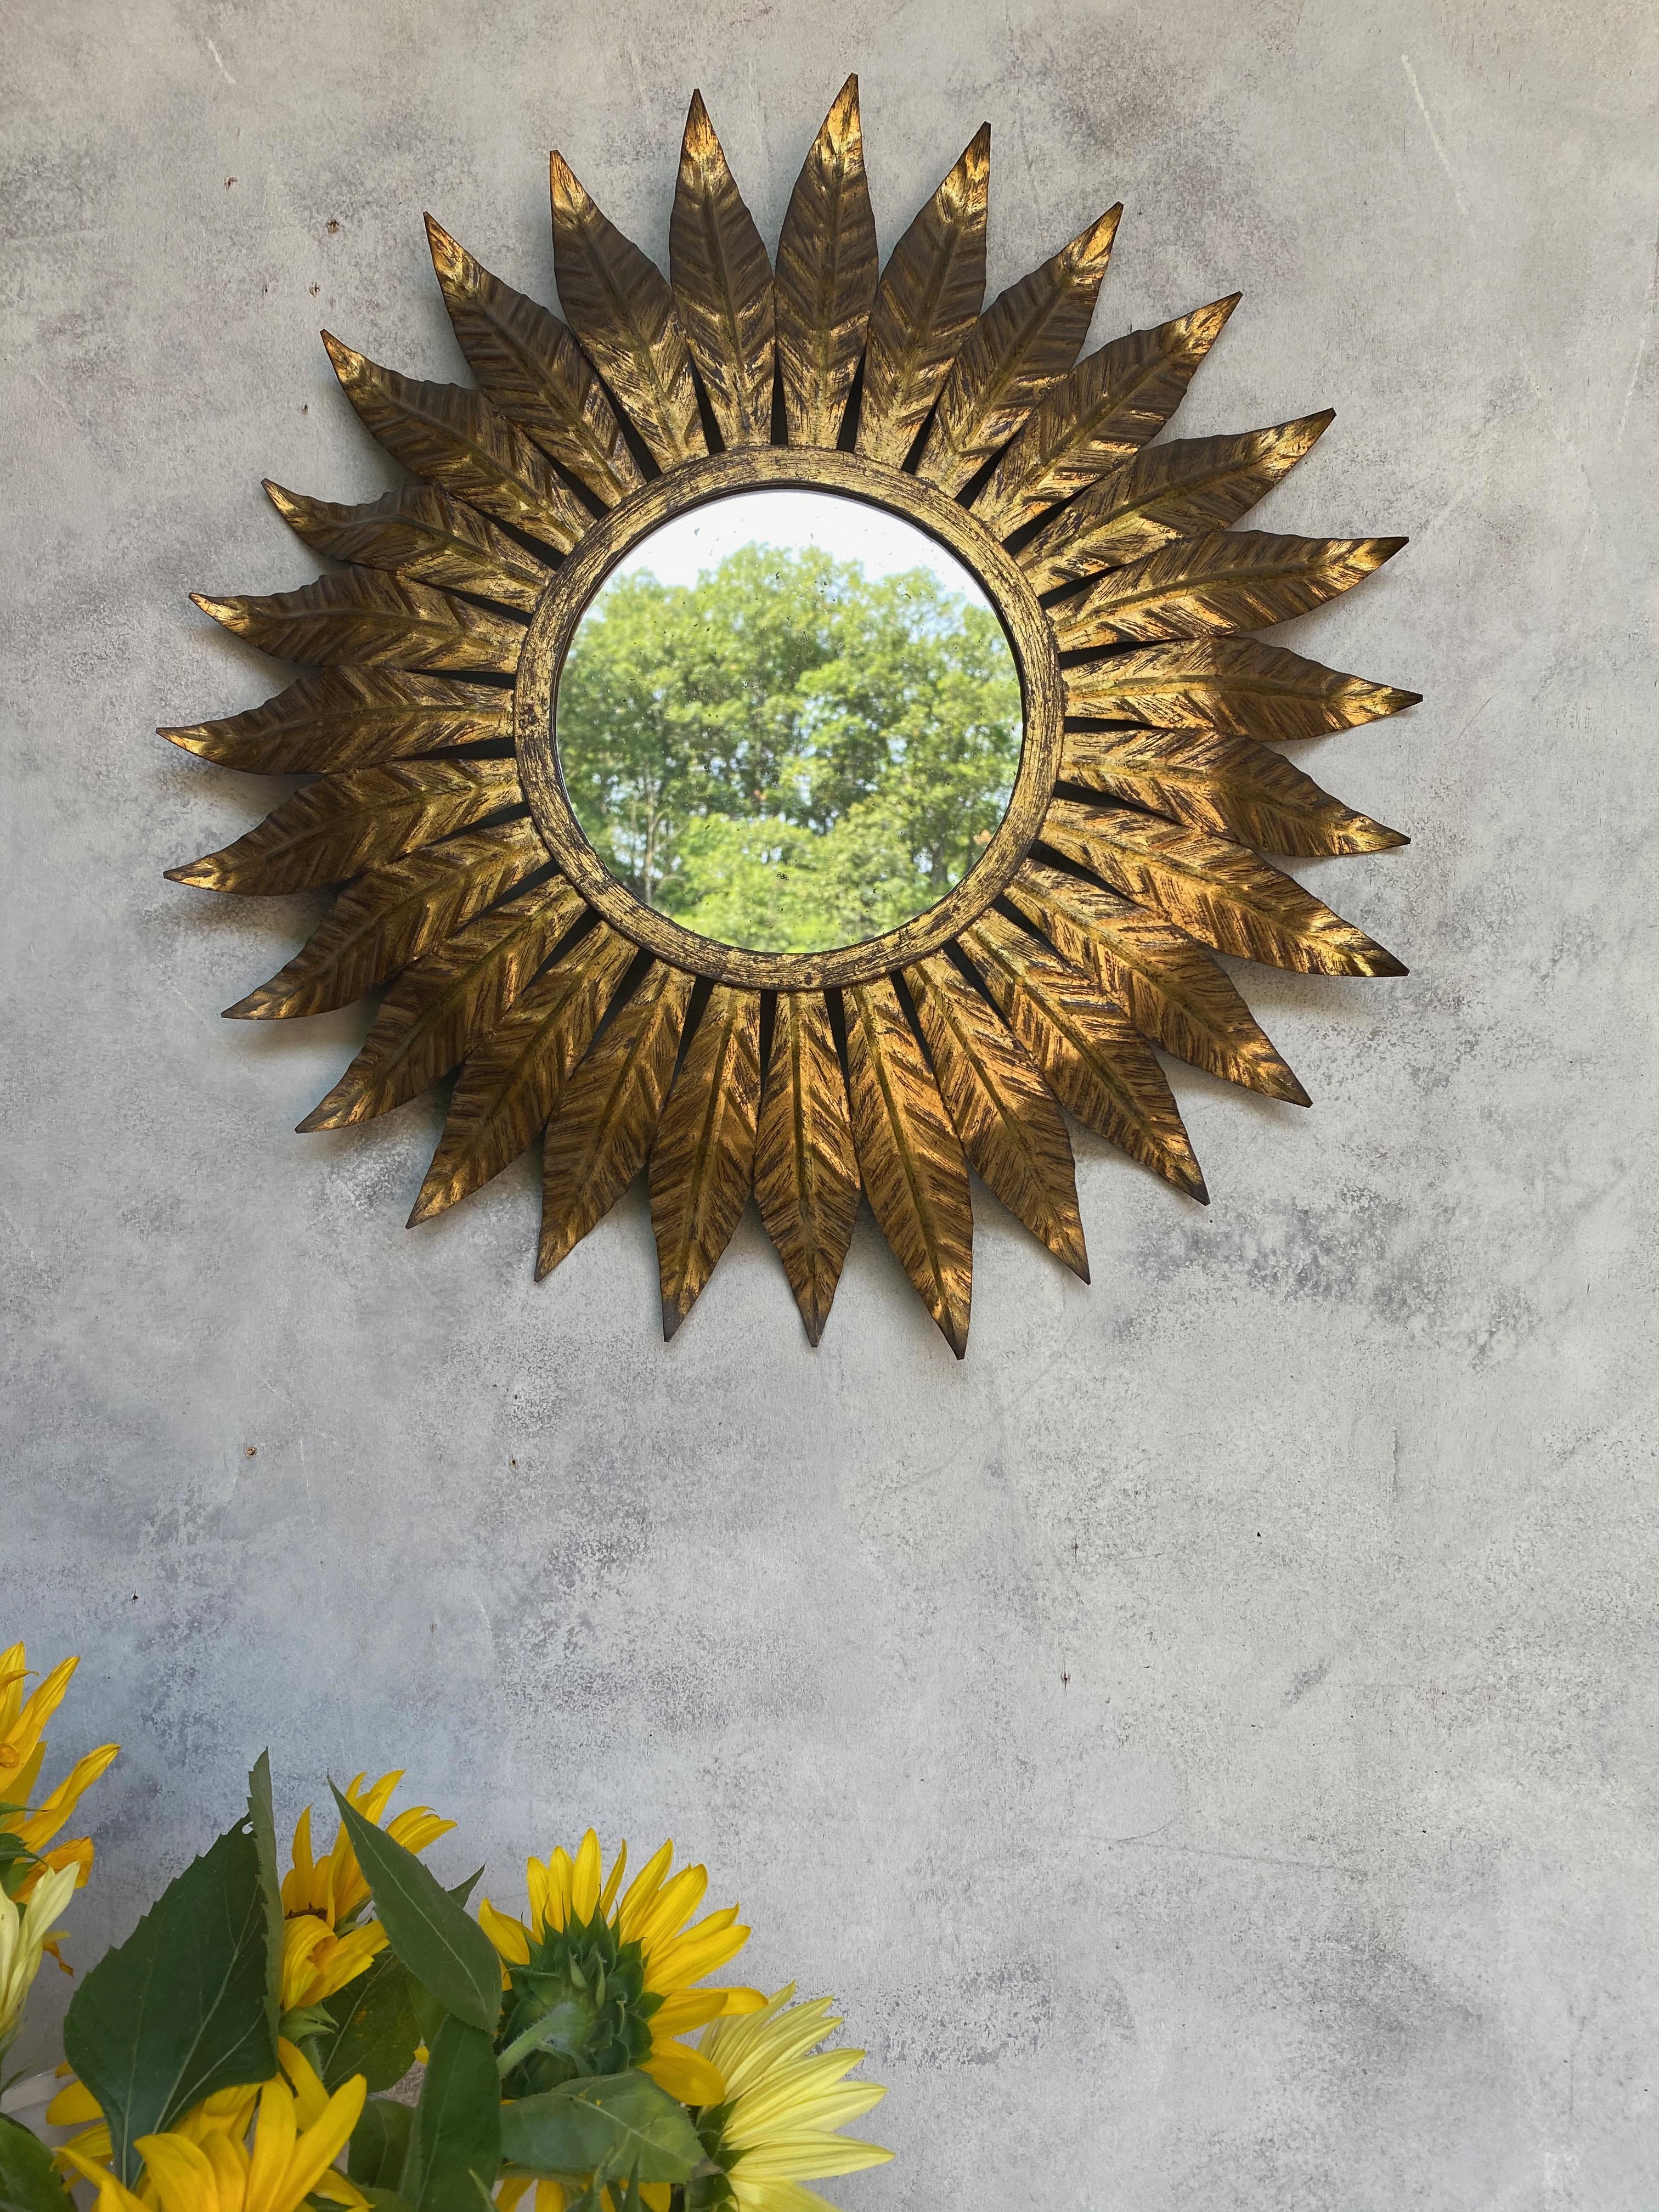 Mid-20th Century Round Spanish Gilt Metal Sunburst Mirror With Large Radiating Leaves For Sale